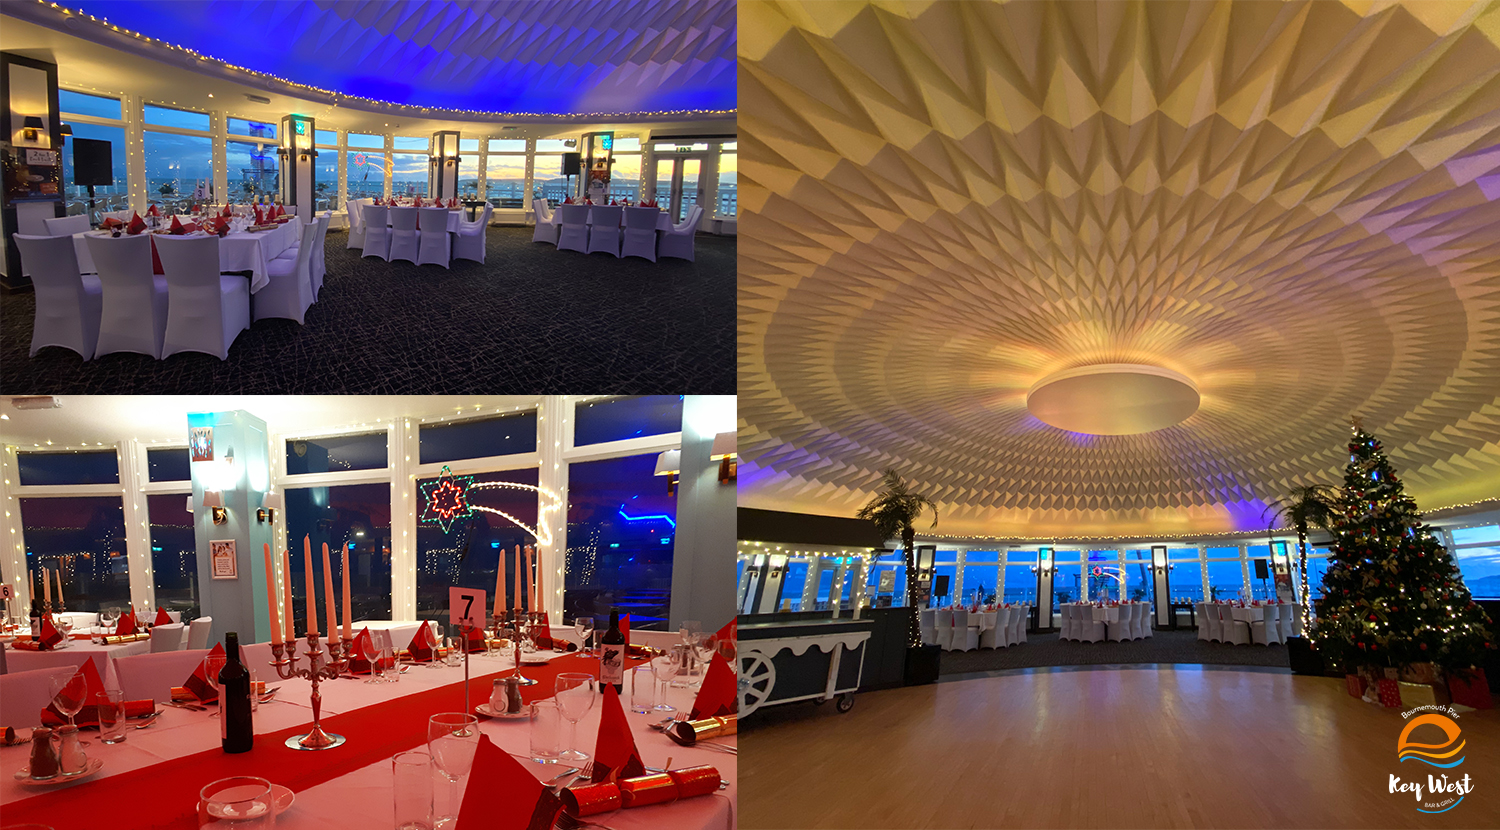 Bring your Christmas party to Key West on Bournemouth Pier – ‘Join A Party’ Nights are back!